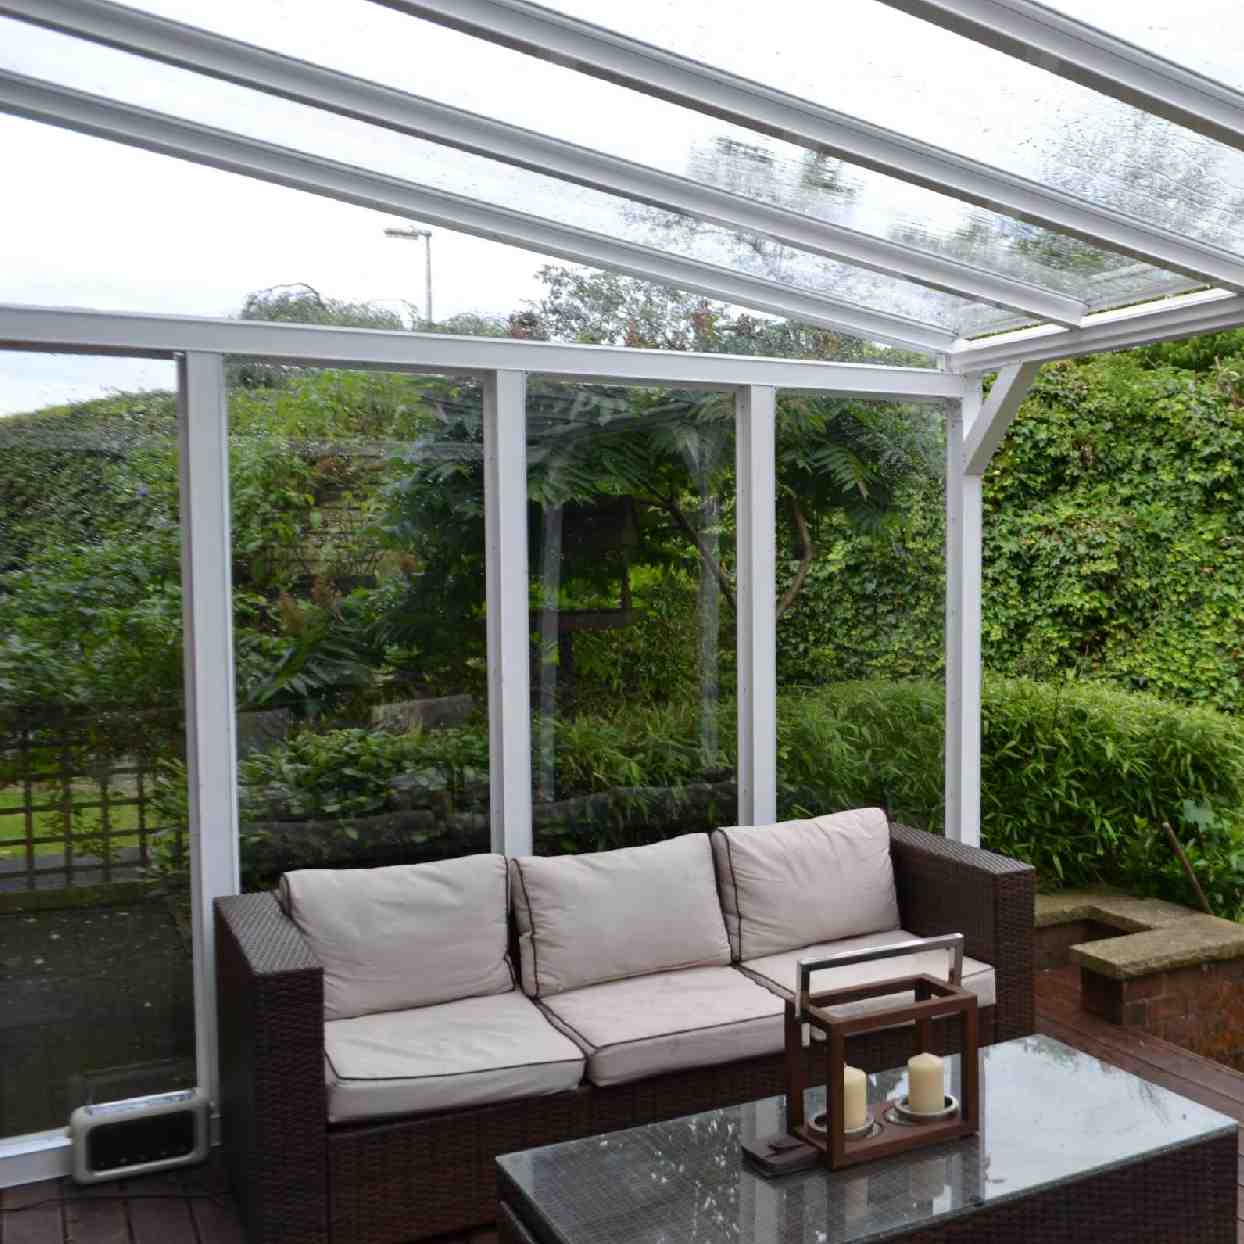 Buy Omega Verandah White with 16mm Polycarbonate Glazing - 10.6m (W) x 4.0m (P), (5) Supporting Posts online today